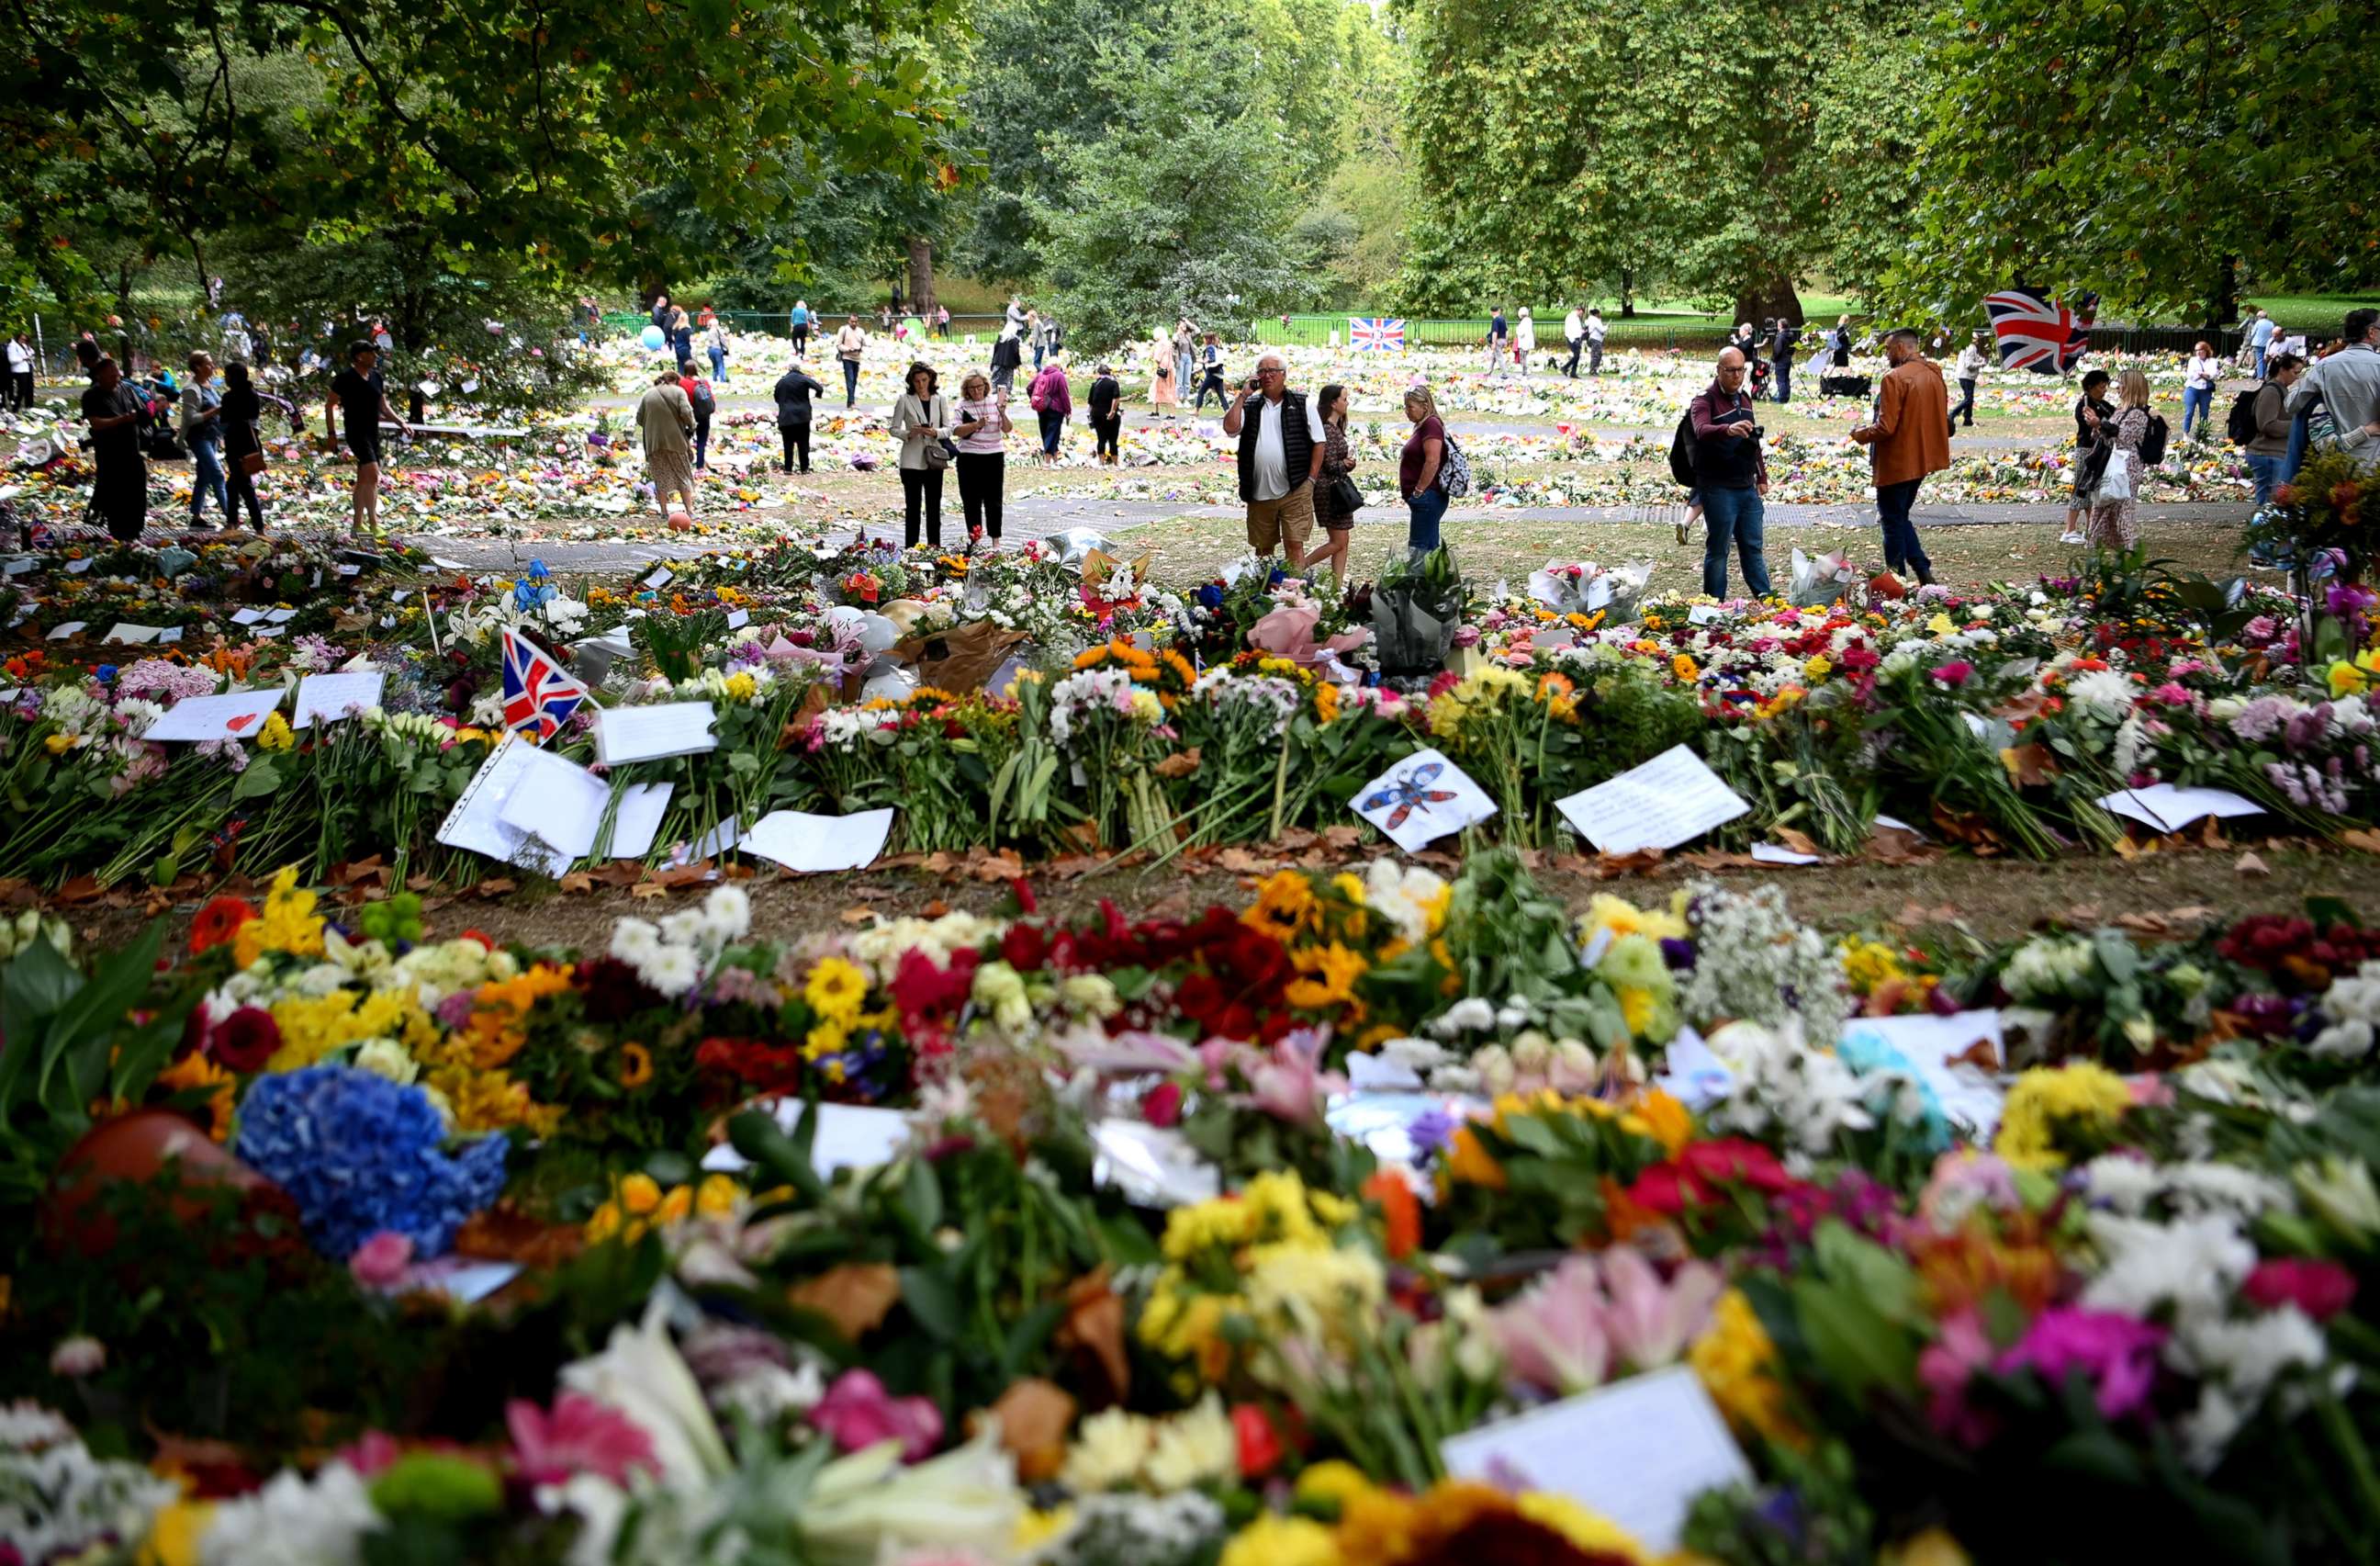 PHOTO: Members of the public visit the flowers in Green Park in memory of Queen Elizabeth II on Sept. 13, 2022 in London.